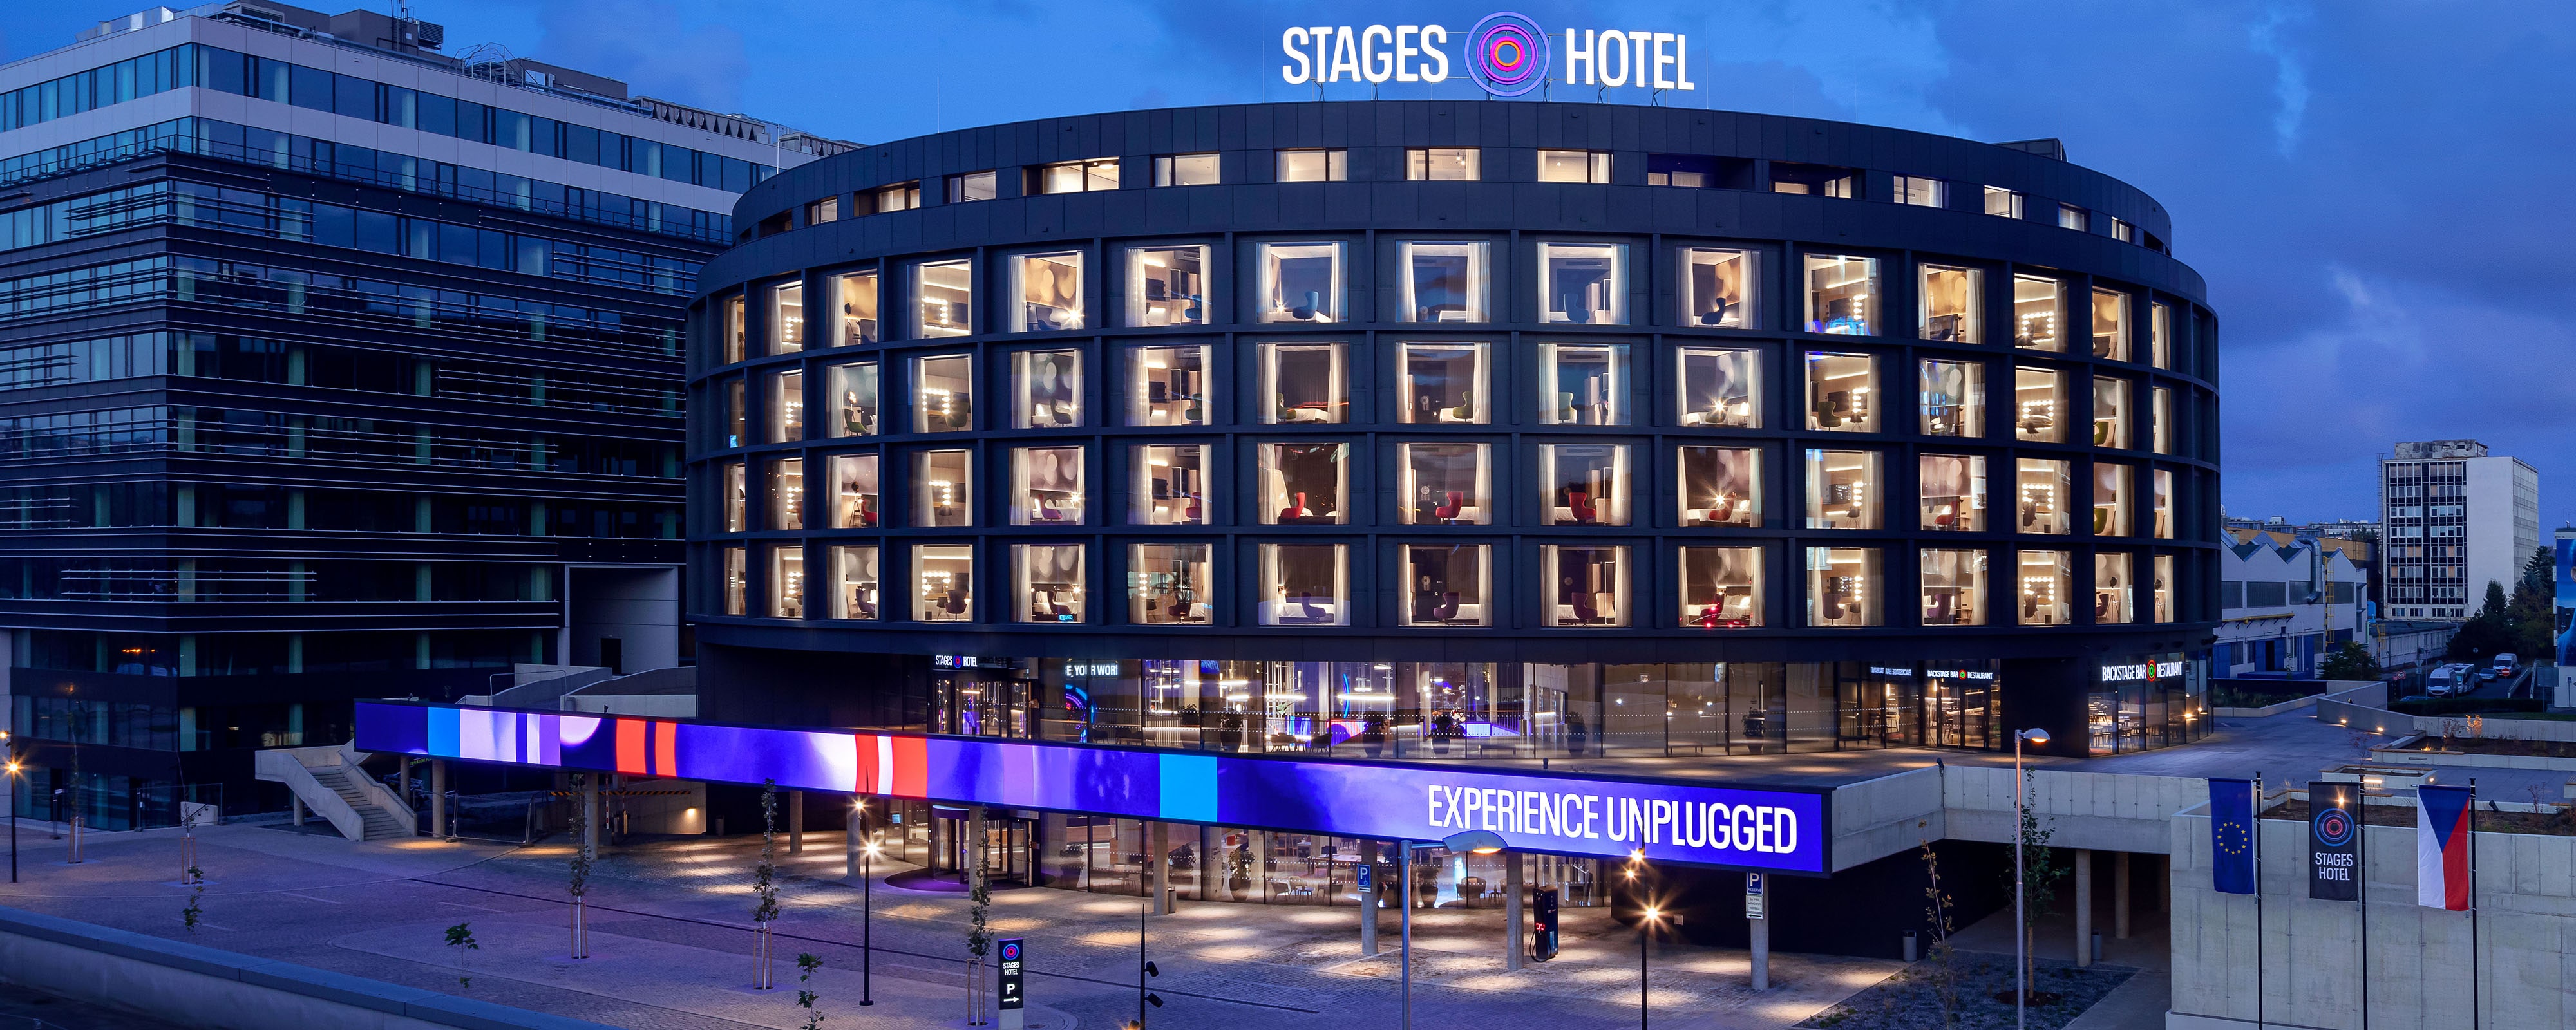 Image for Stages Hotel Prague, a Tribute Portfolio Hotel, a Marriott hotel.